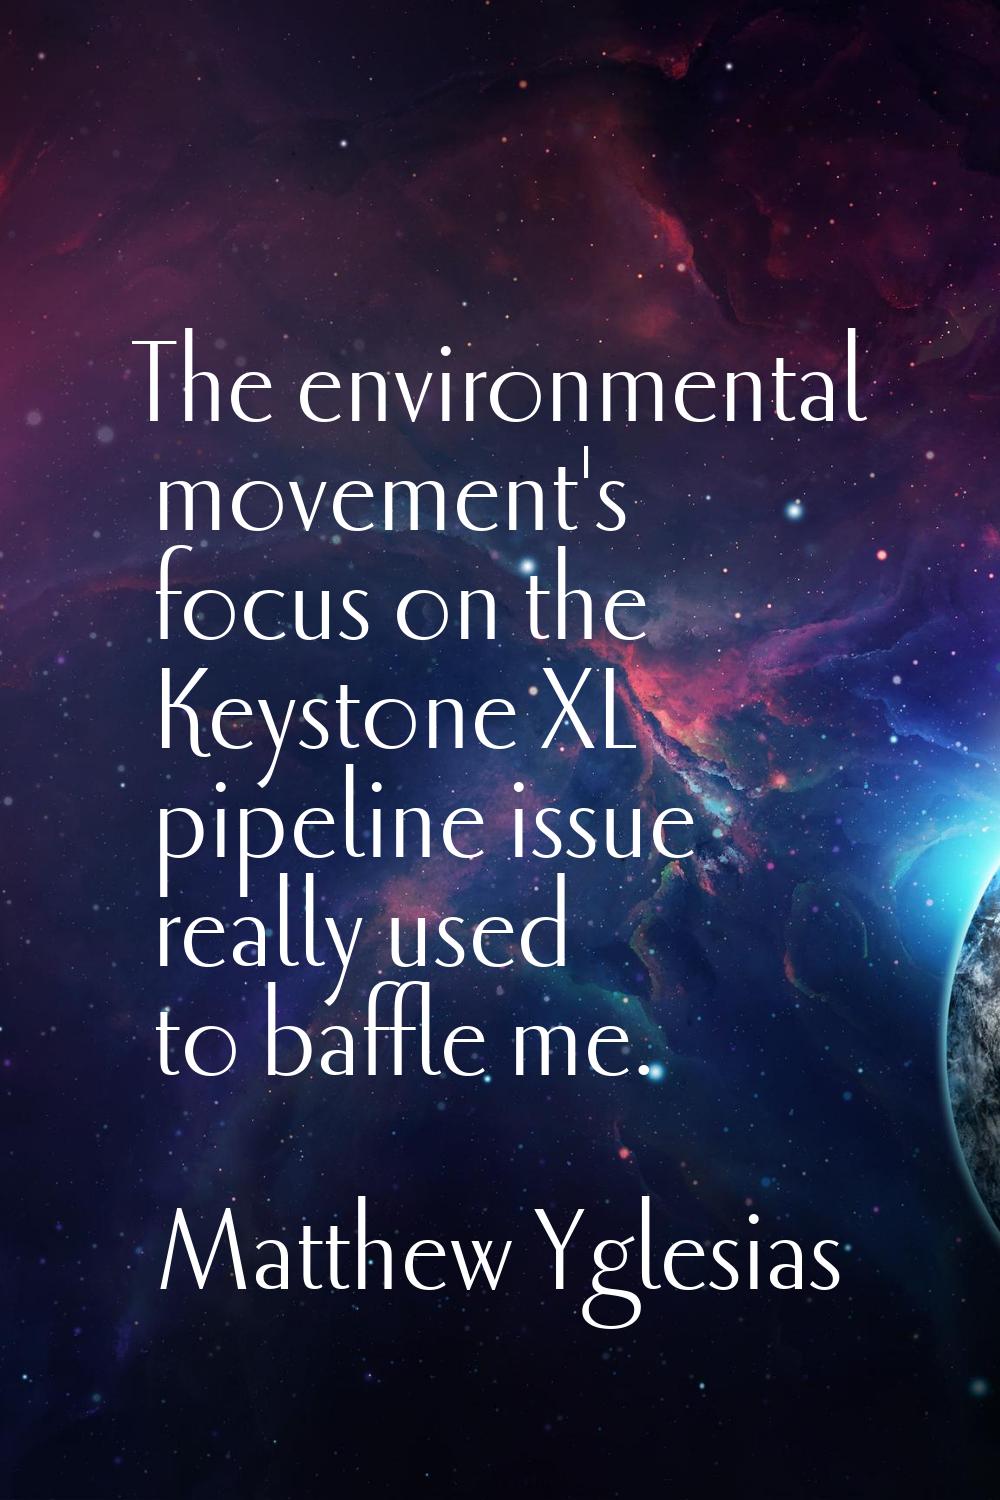 The environmental movement's focus on the Keystone XL pipeline issue really used to baffle me.